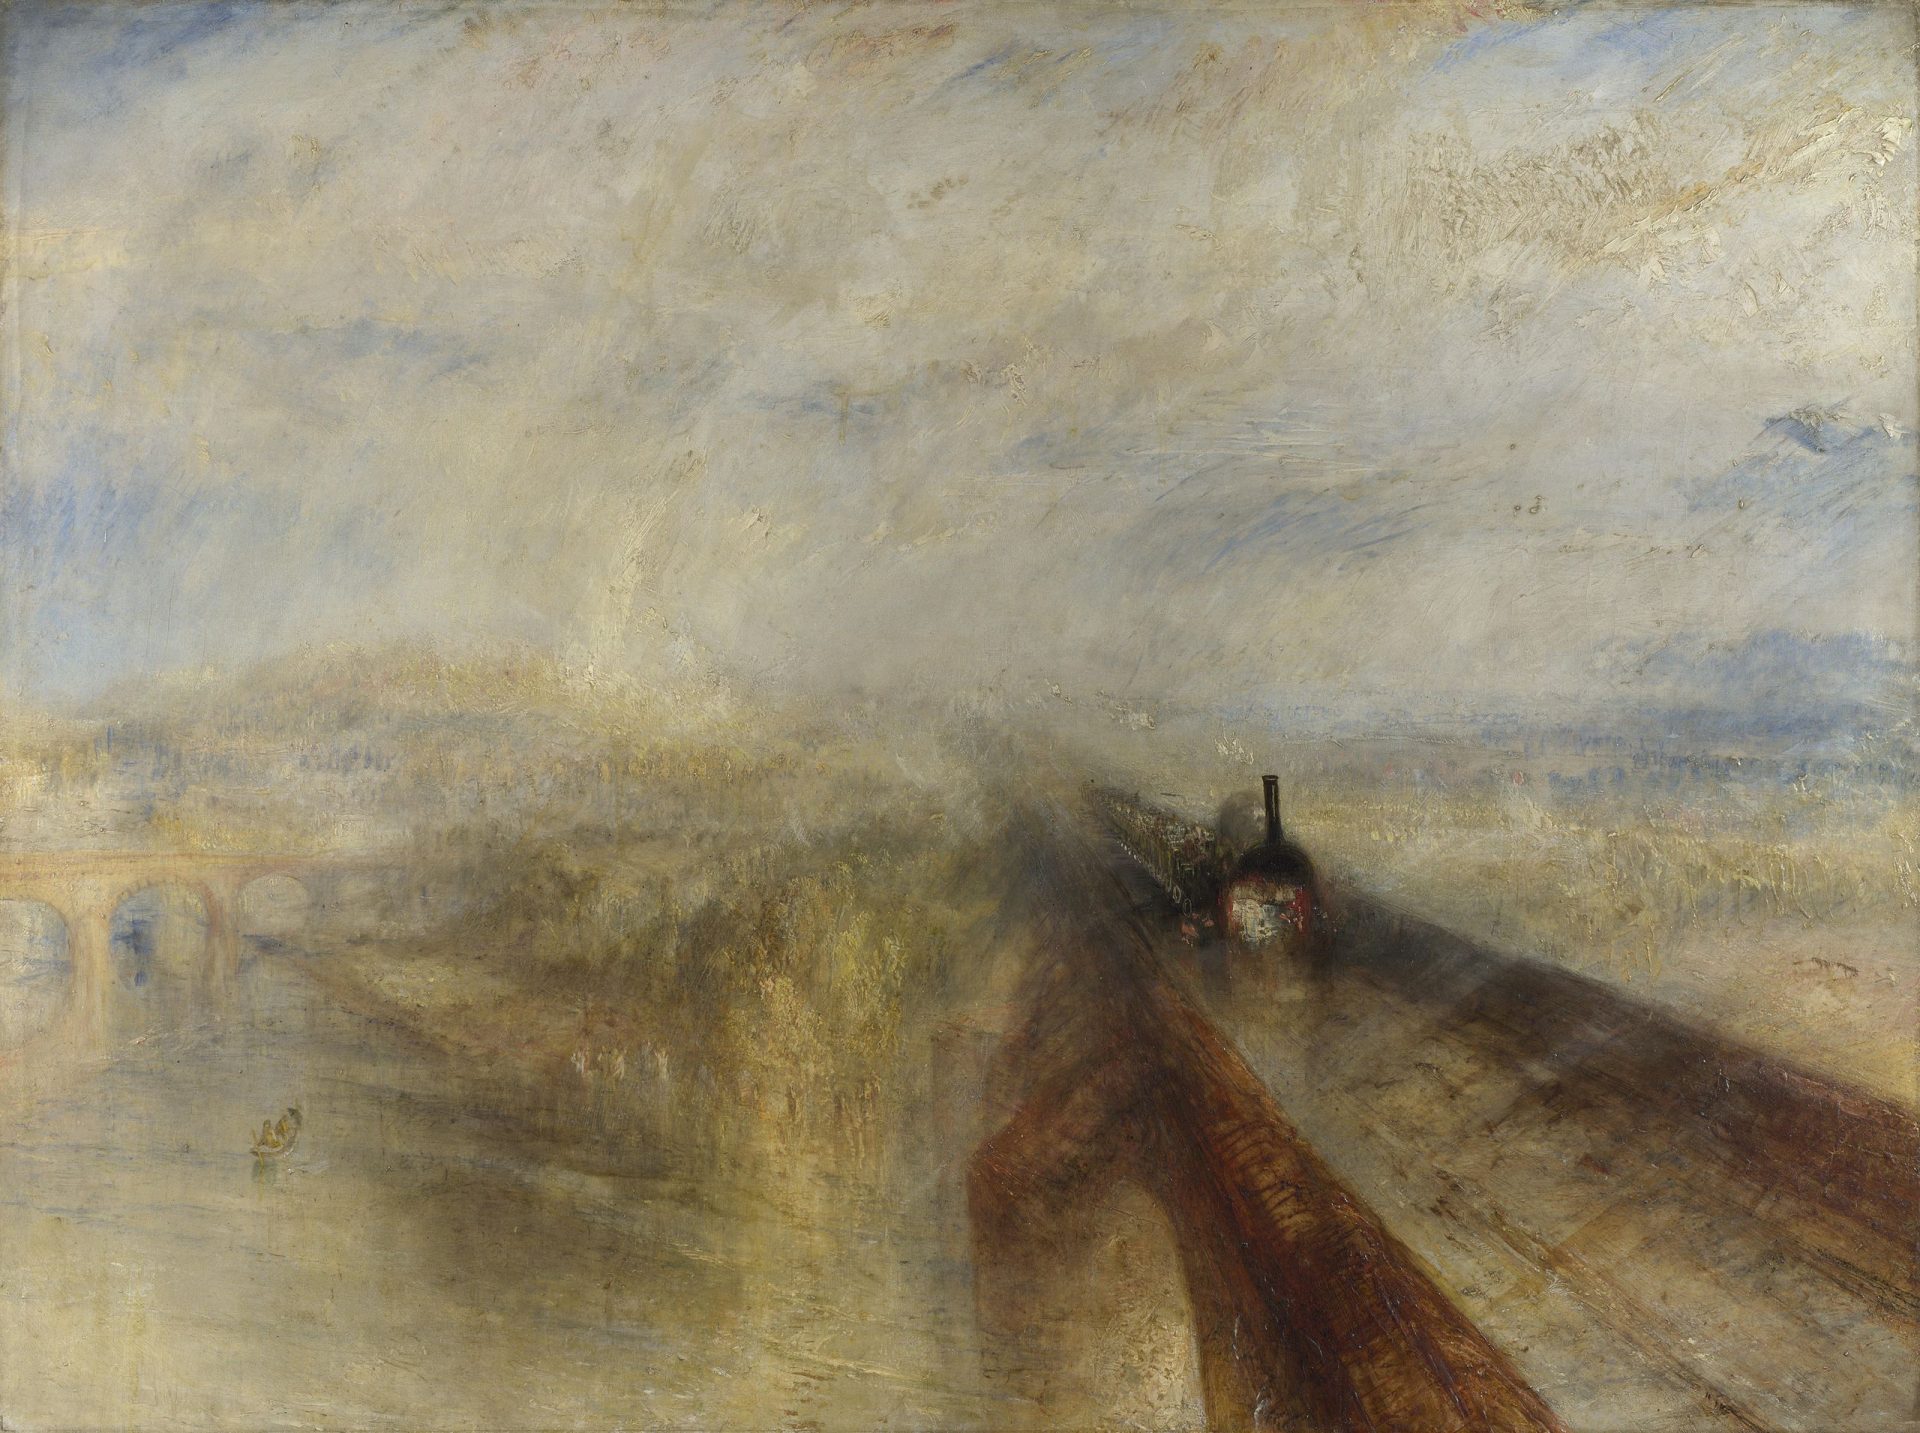 A painting depicting a steam train racing across a bridge in the rain.